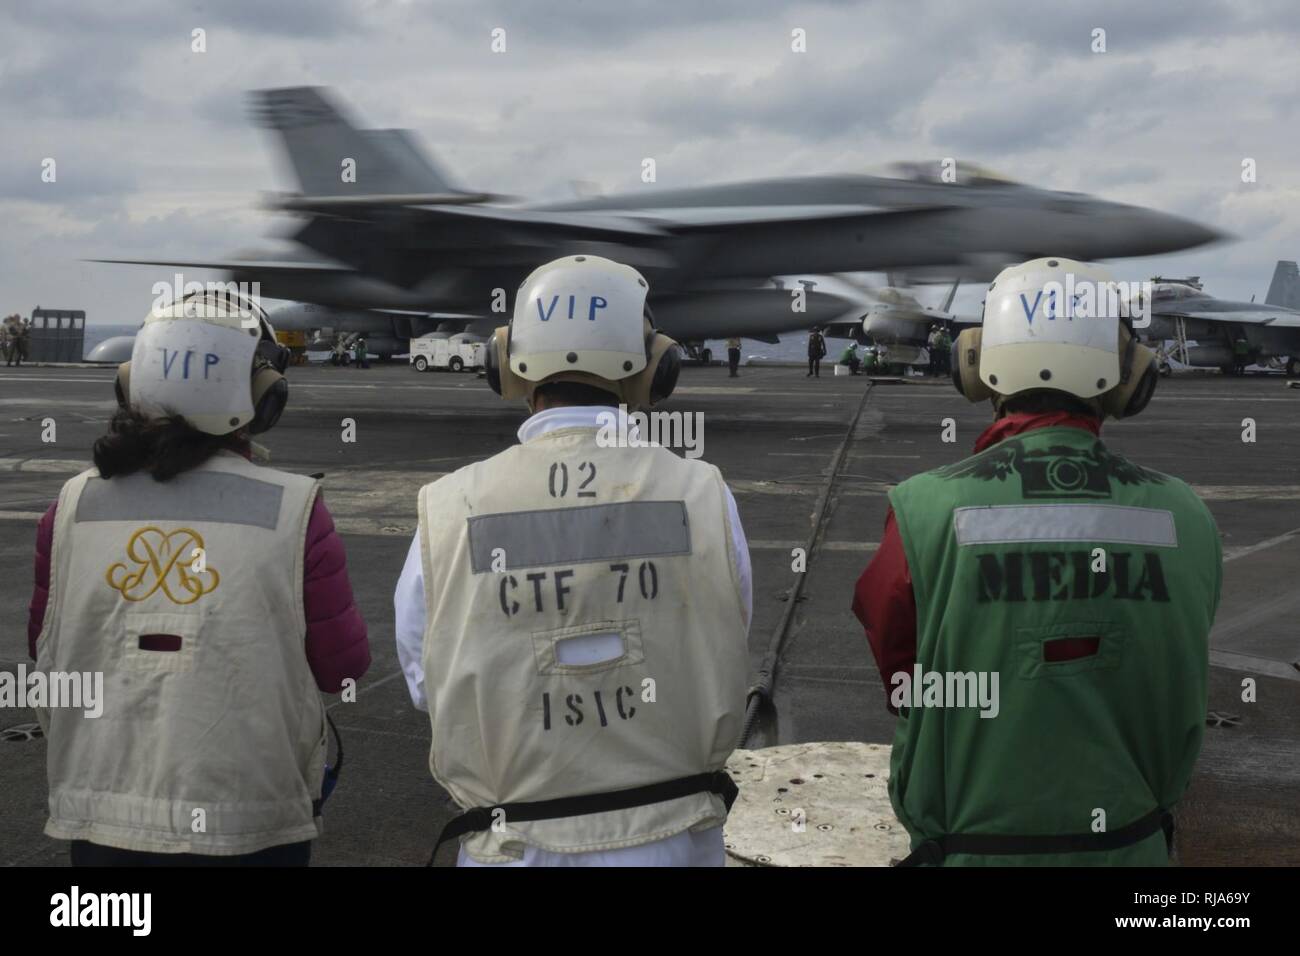 PHILIPPINE SEA (Nov. 1, 2016) Visitors from Japan watch as an F/A-18E Super Hornet, assigned to the “Dambusters” of Strike Fighter Squadron (VFA) 195, lands on the flight deck of the Navy’s only forward-deployed aircraft carrier, USS Ronald Reagan (CVN 76), as part of Exercise Keen Sword 2017 (KS17). KS17 is a joint, bilateral field-training exercise involving U.S. military and Japanese Maritime Self-Defense Force personnel, designed to increase combat readiness and interoperability of the Japan-U.S. alliance. Stock Photo